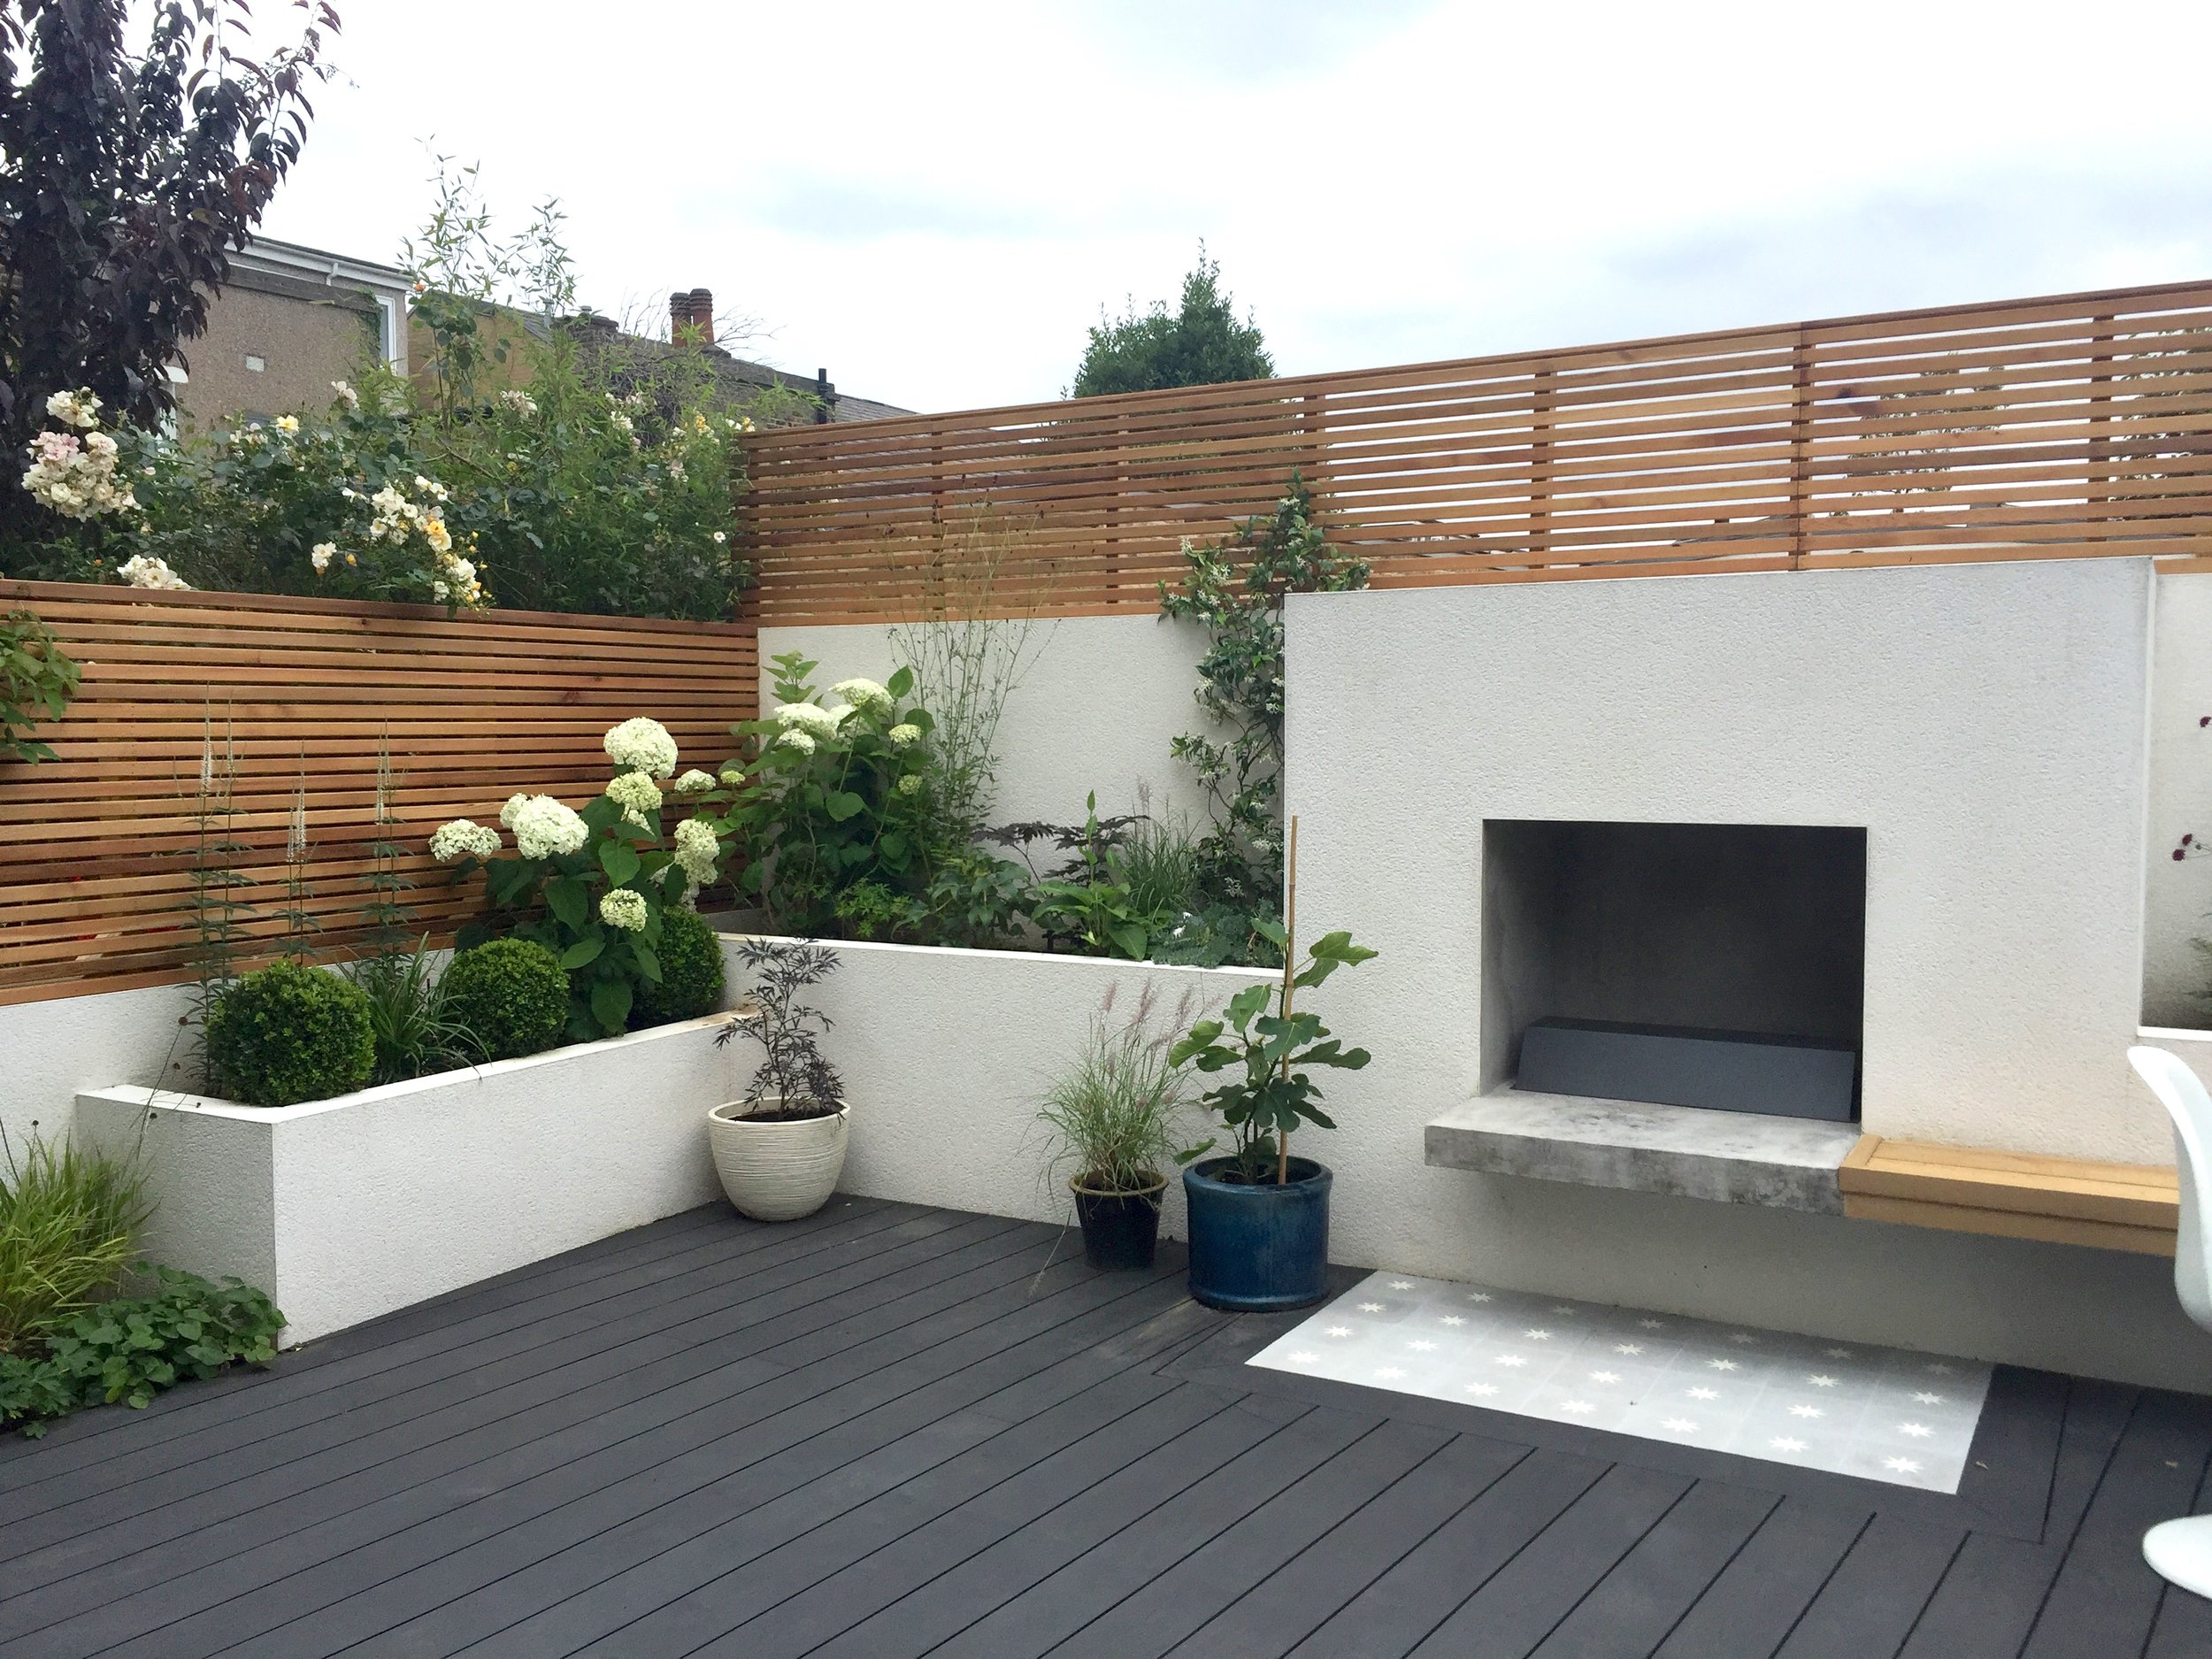 OUTDOOR FIREPLACE, EAST DULWICH